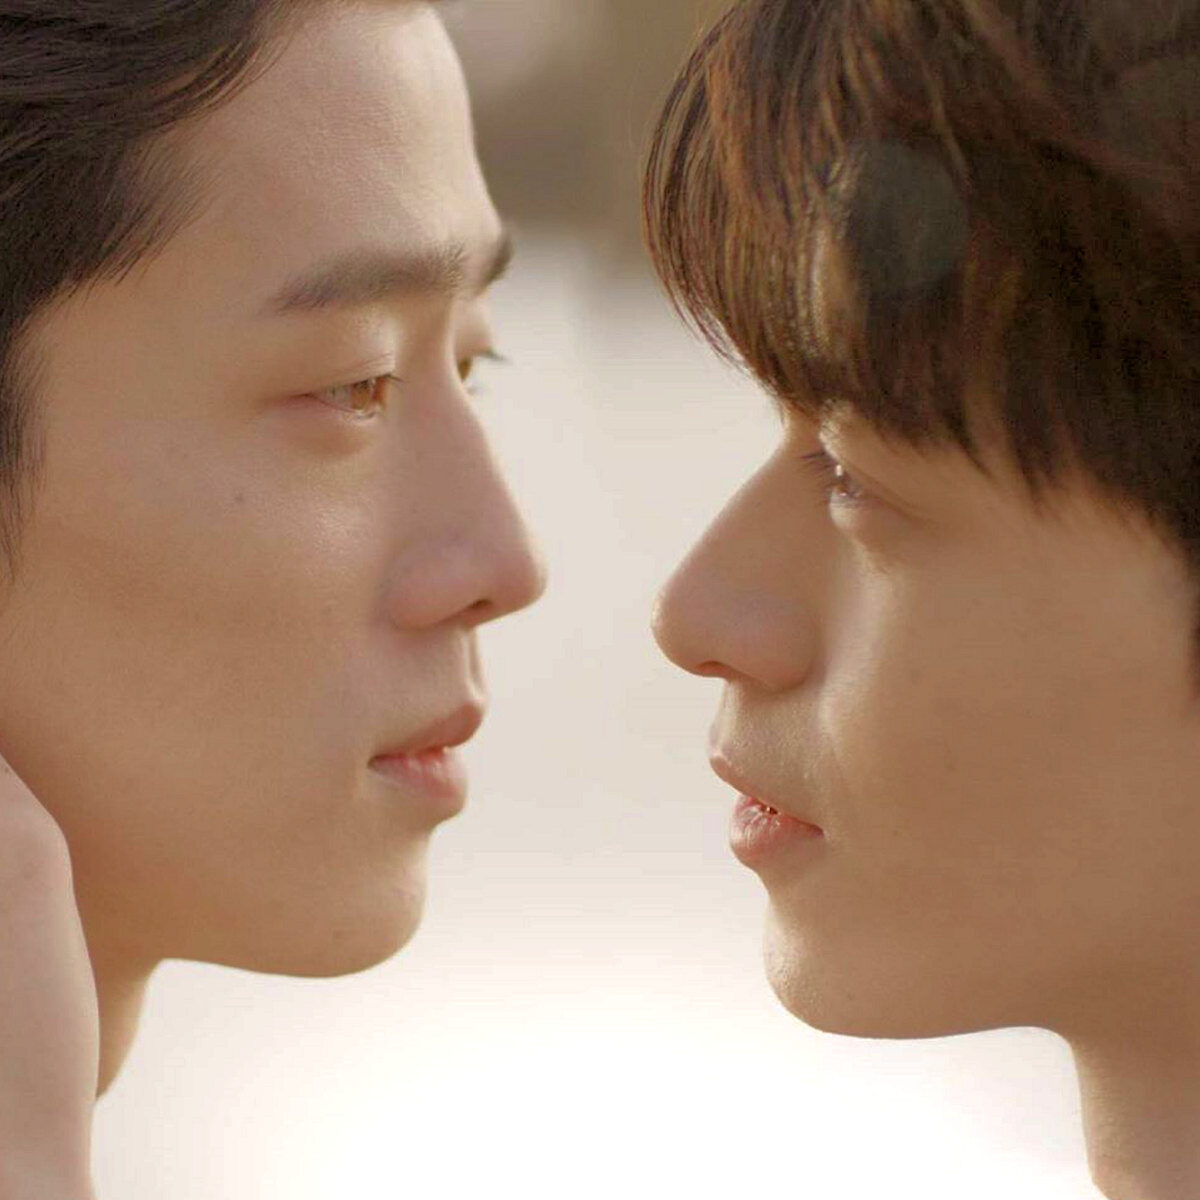 where your eyes linger kdrama 11